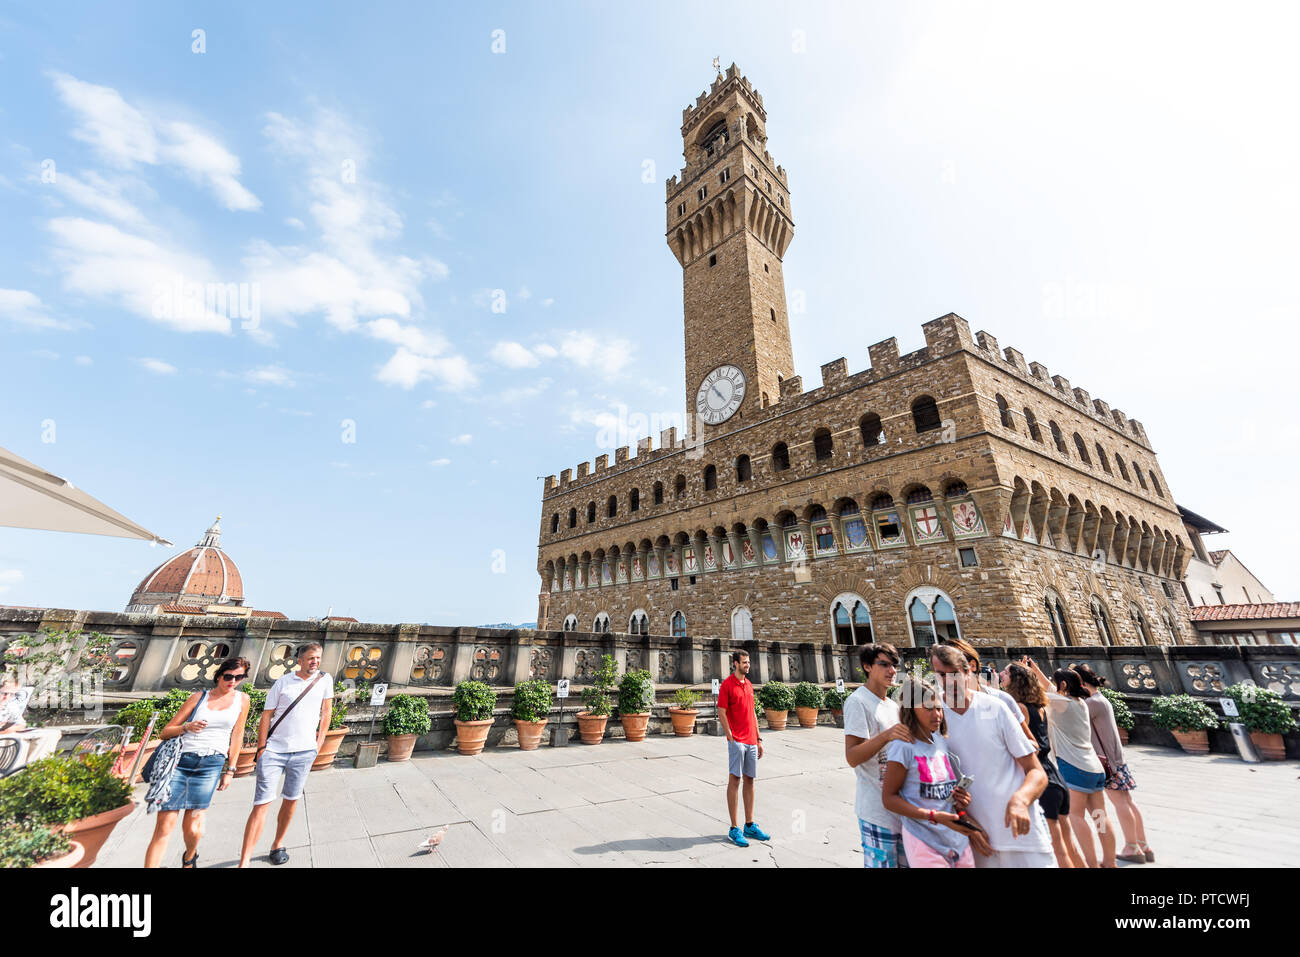 Firenze, Italy - August 30, 2018: Many people by cafe on terrace of famous Florence Uffizi art museum gallery with view of old building Palazzo Vecchi Stock Photo